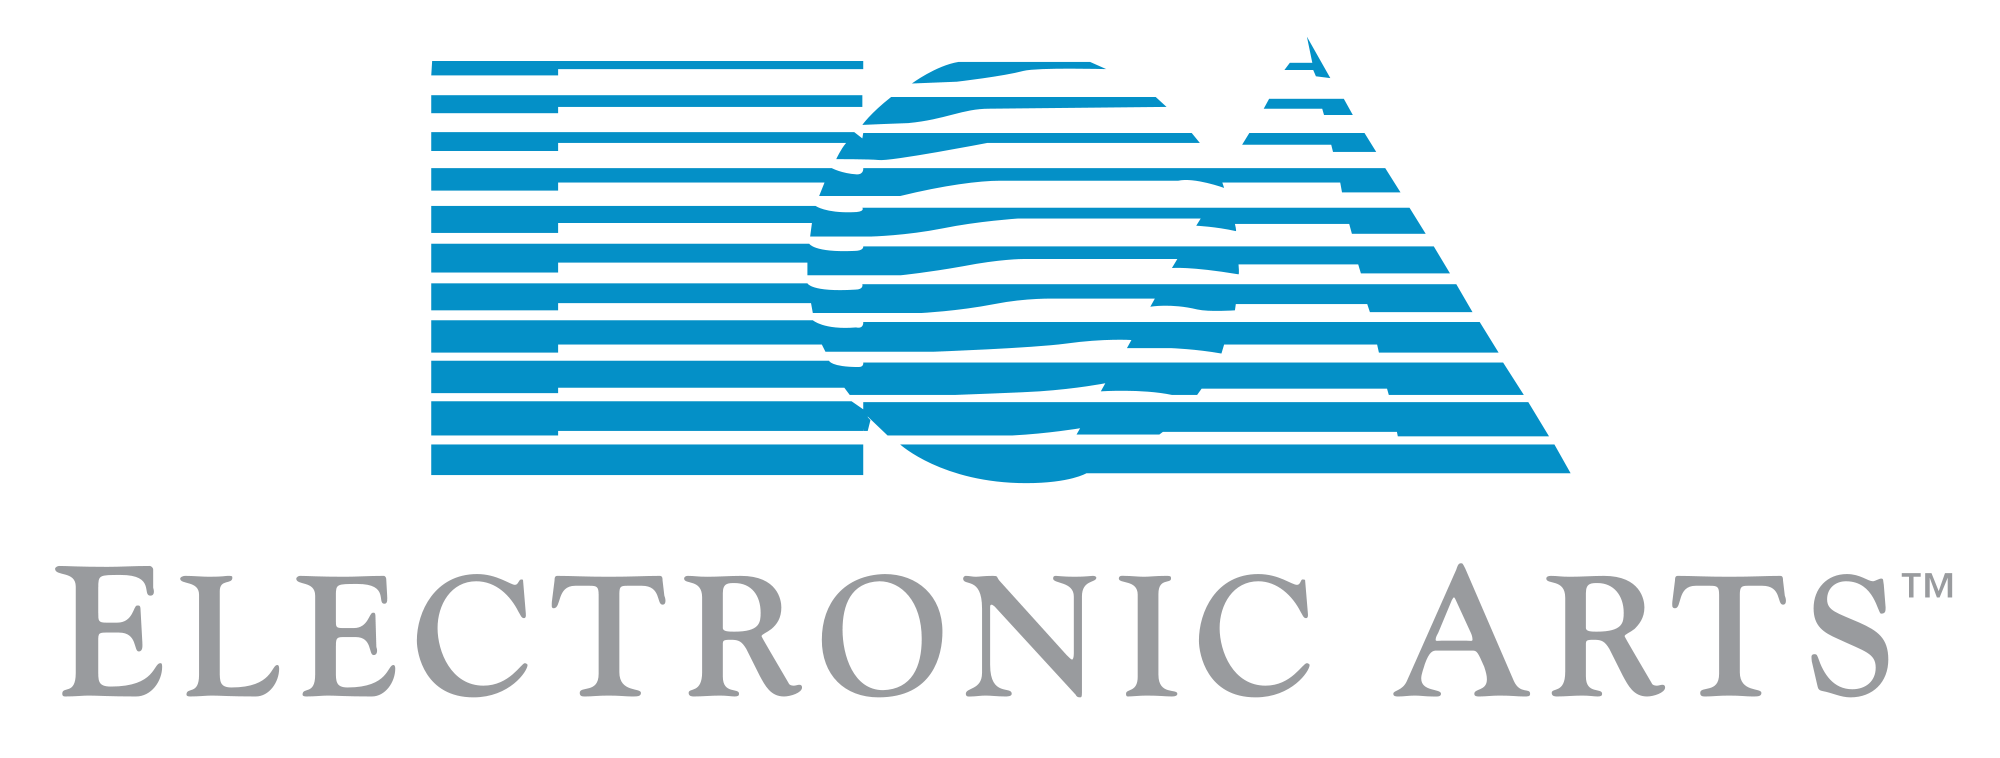 Electronic Arts PNG - 172546